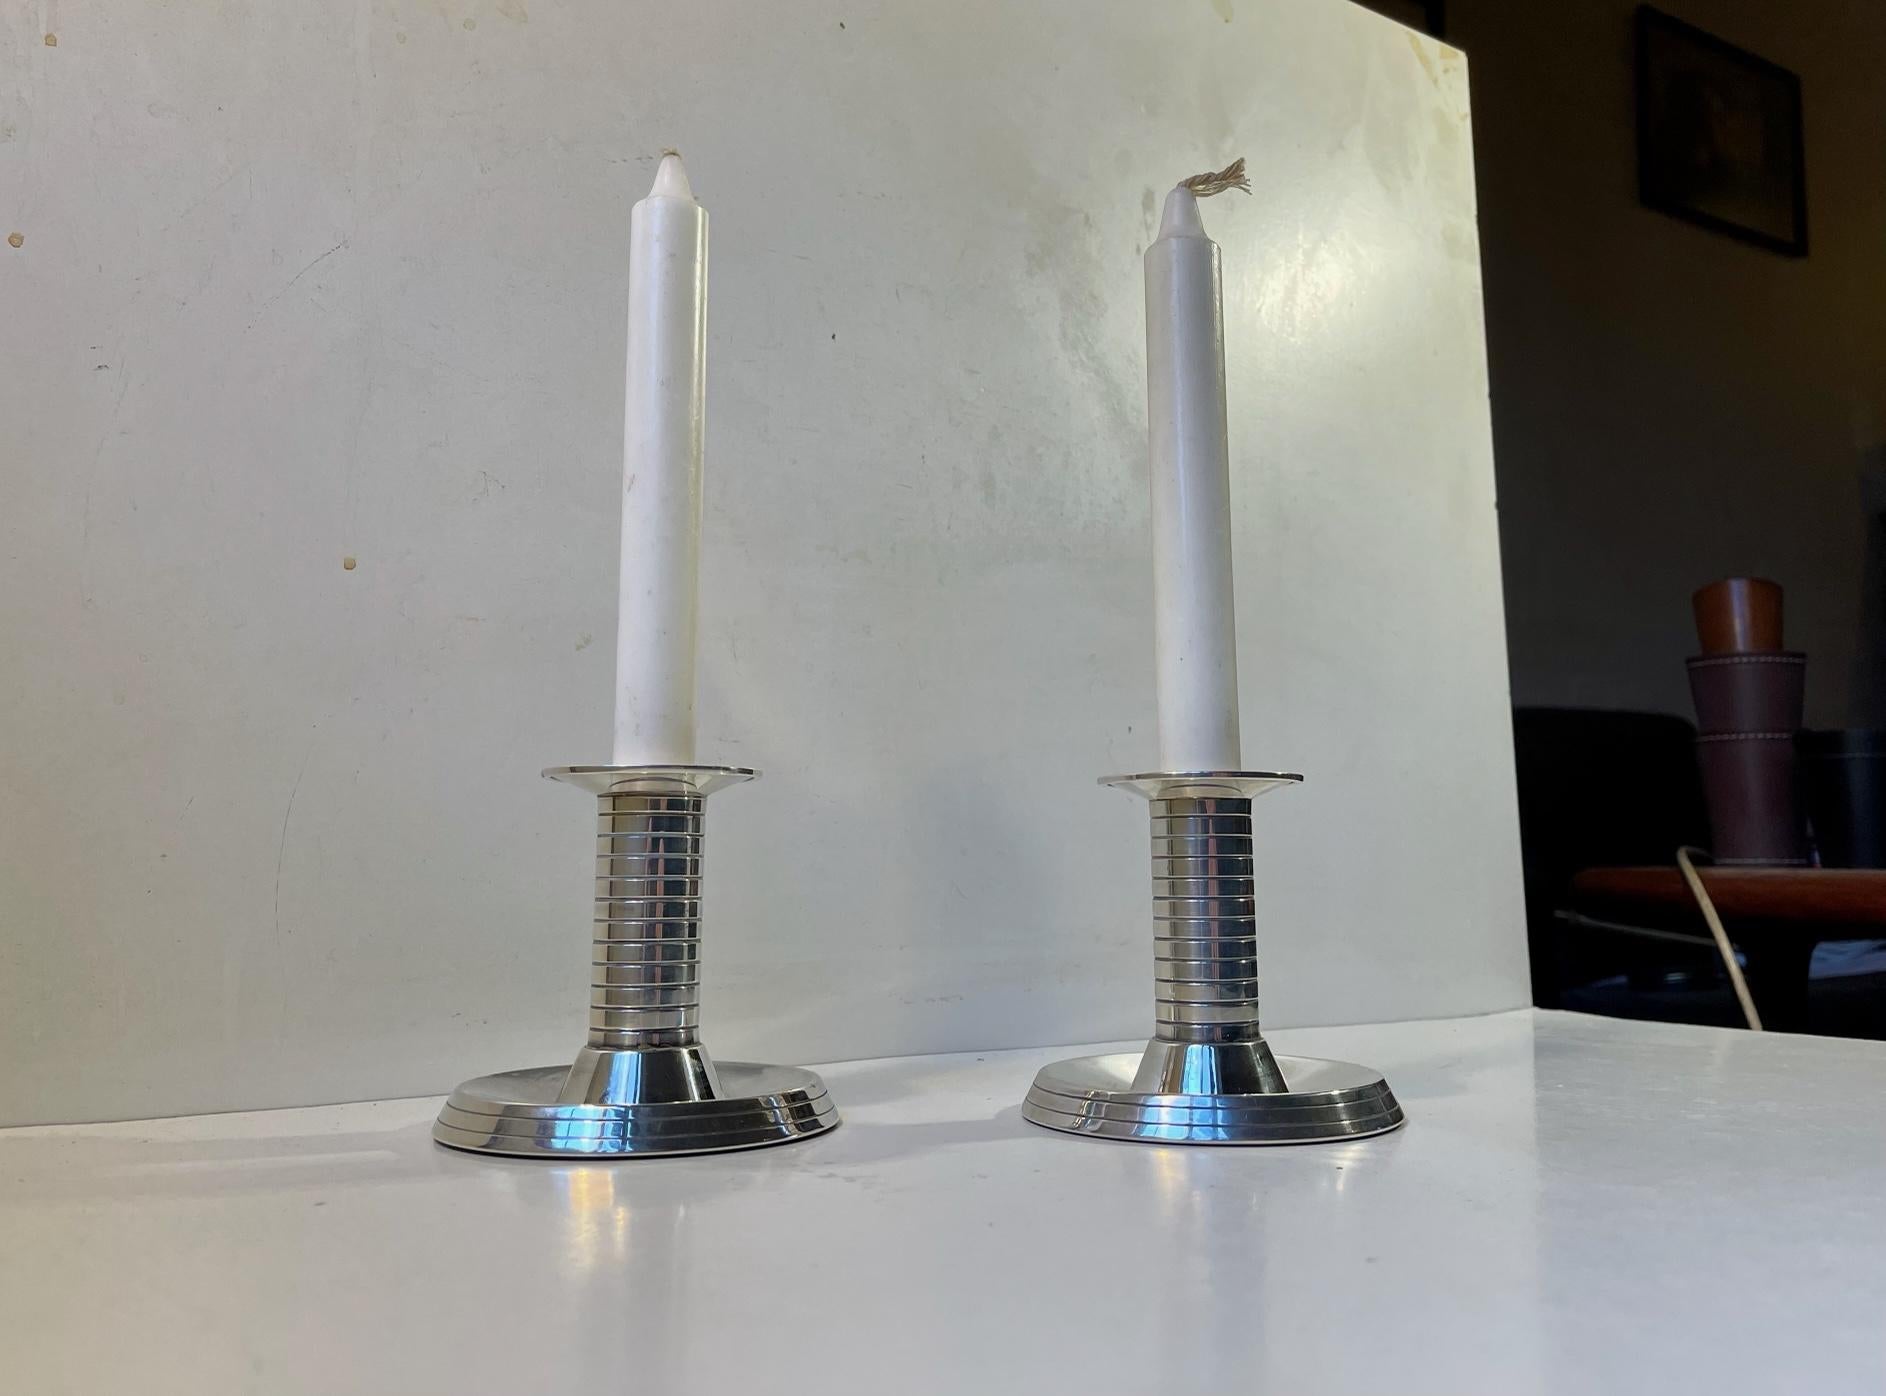 A pair of silver plated candleholders for regular sized candles. Characteristic architectural Art Deco details with the 'stepped' bases and horizontal fluted stems. The silver plating is marked with danish hallmarks indicated by two towers. Designed